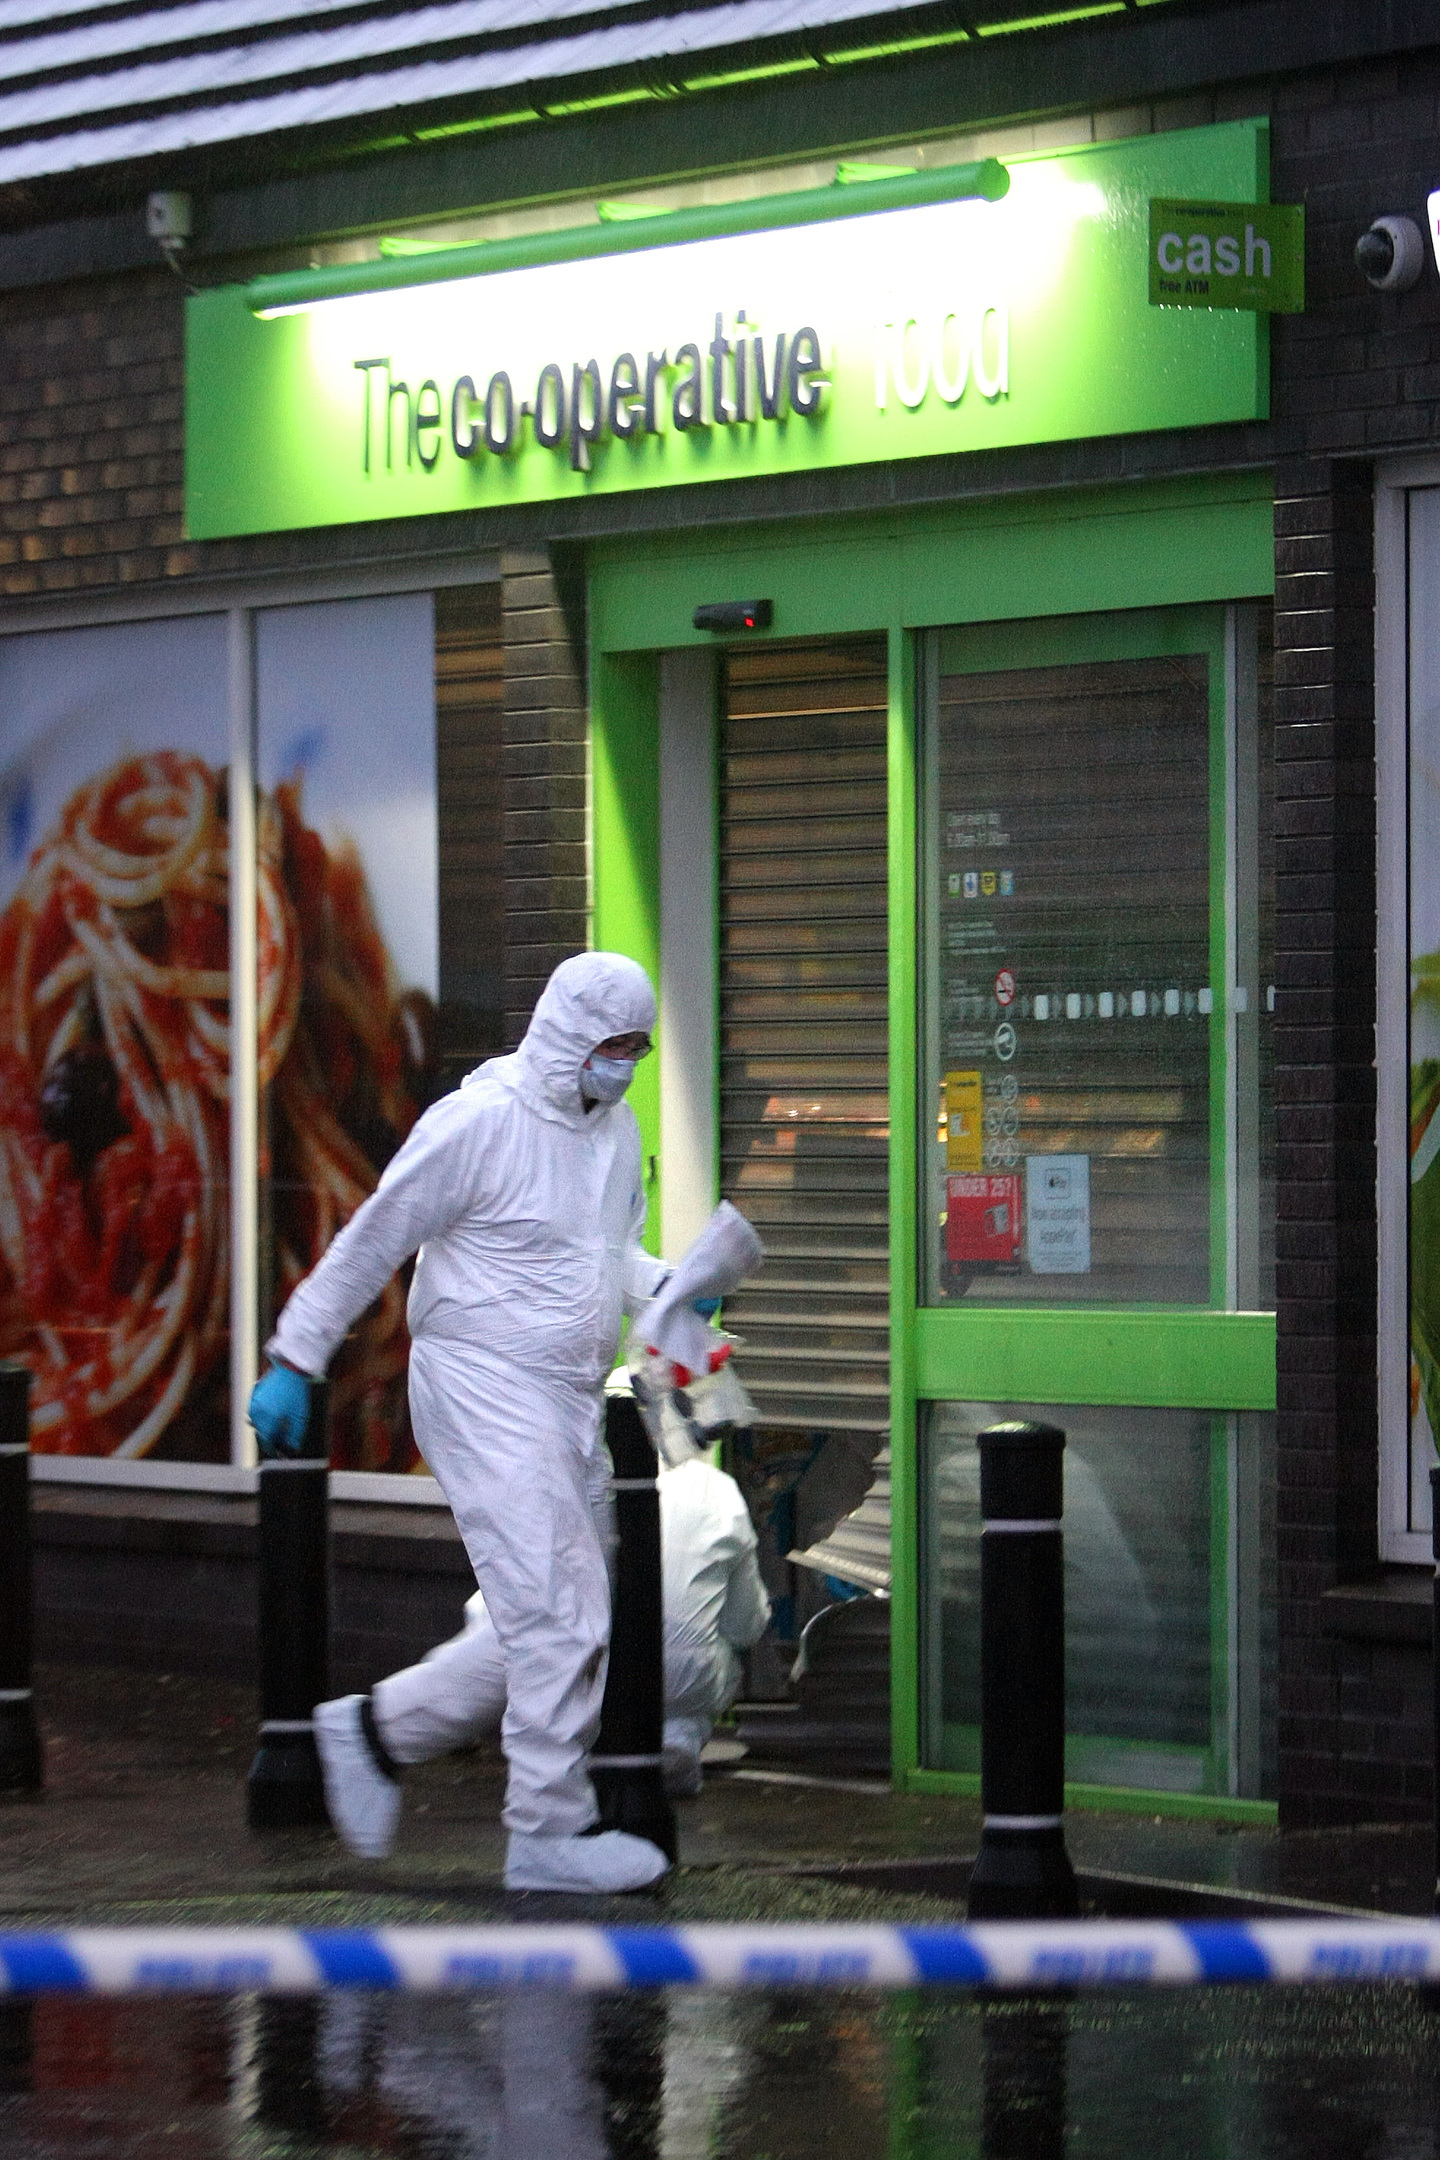 Scene of Crime Officers (SOCO) carrying out investigations in connection with an ATM raid in Carnoustie. 